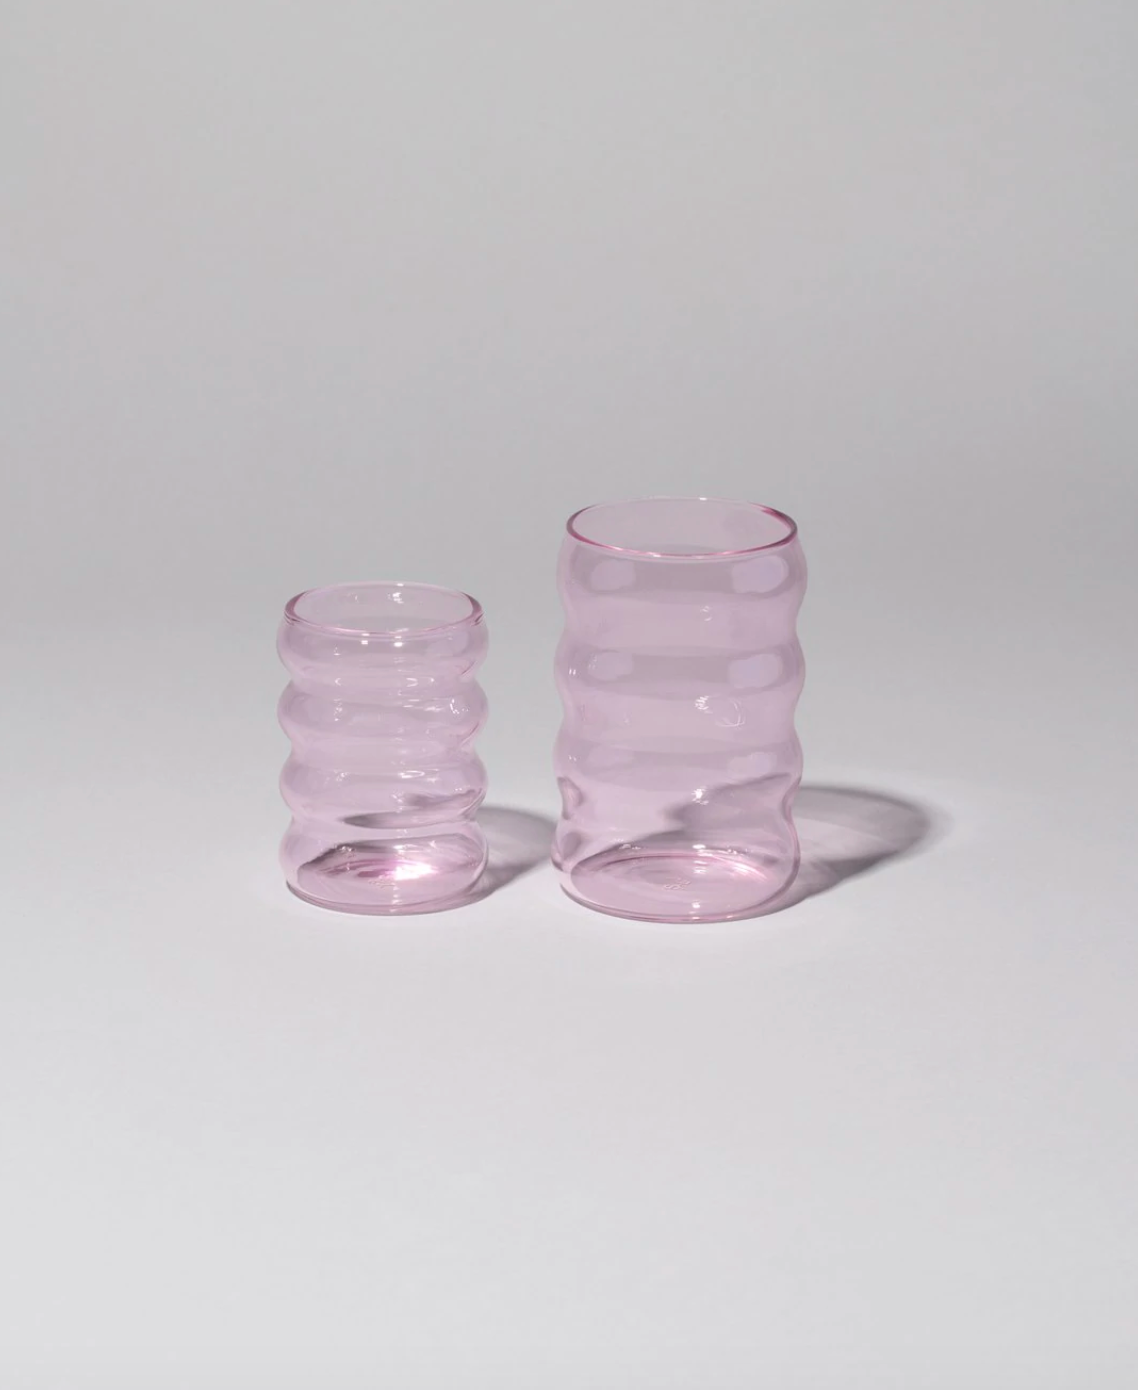 Ripple Cup, Pink